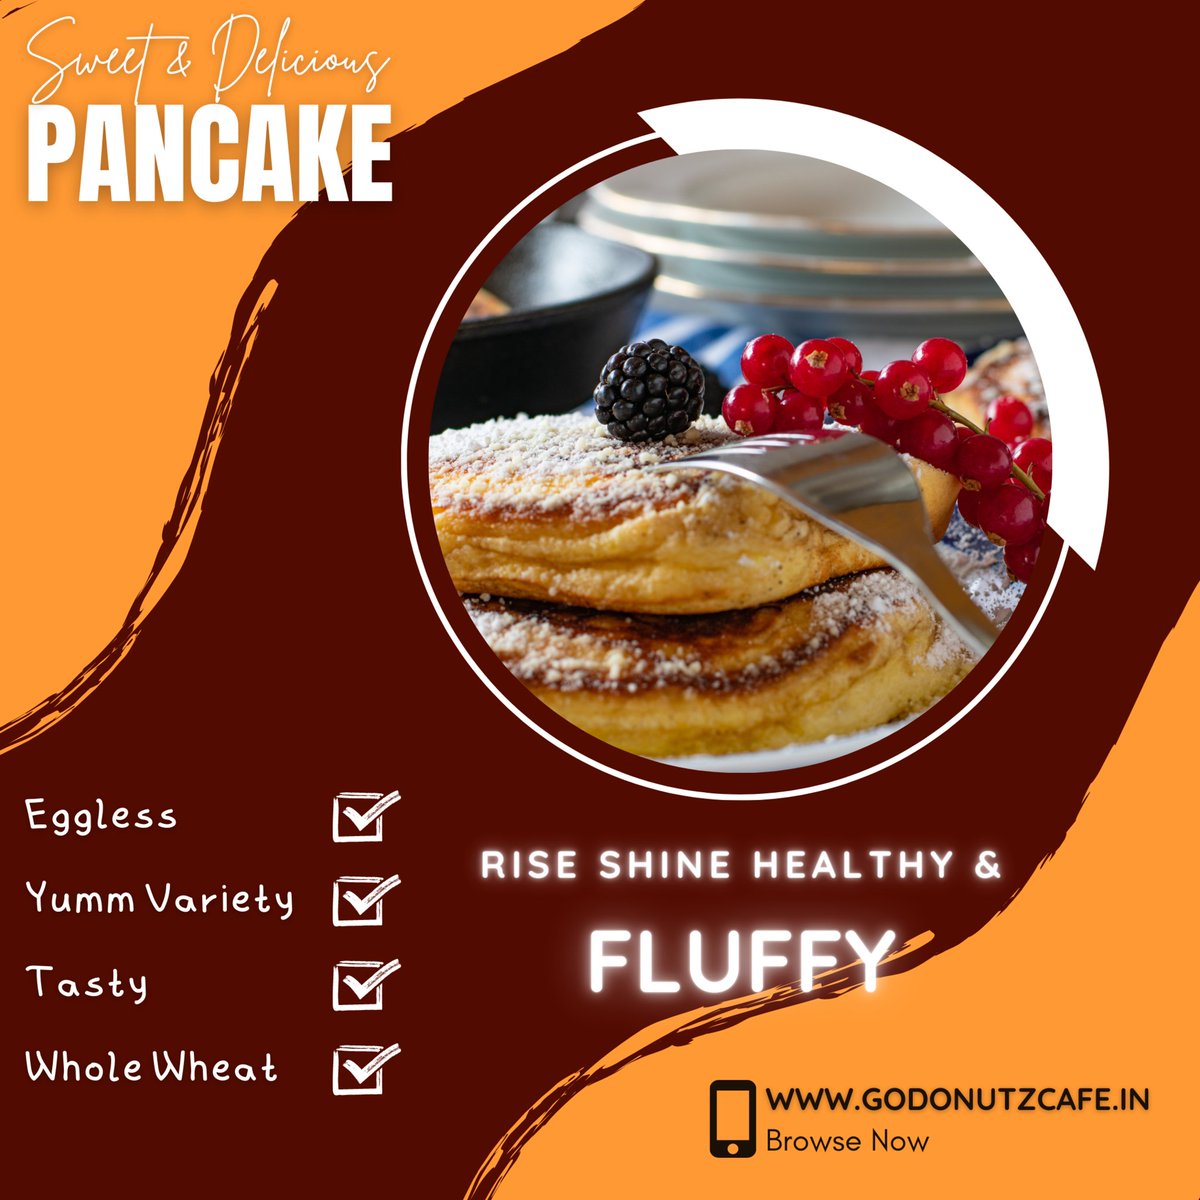 Rise and shine with these fluffy whole-wheat pancakes! Start your day off on the right foot with a delicious and healthy breakfast.
@godoohnutz
🌐bit.ly/3nswasx #breakfastlover #healthylifestyle #weekendbrunch #breakfastofchampions #foodblogger #godoohnutz